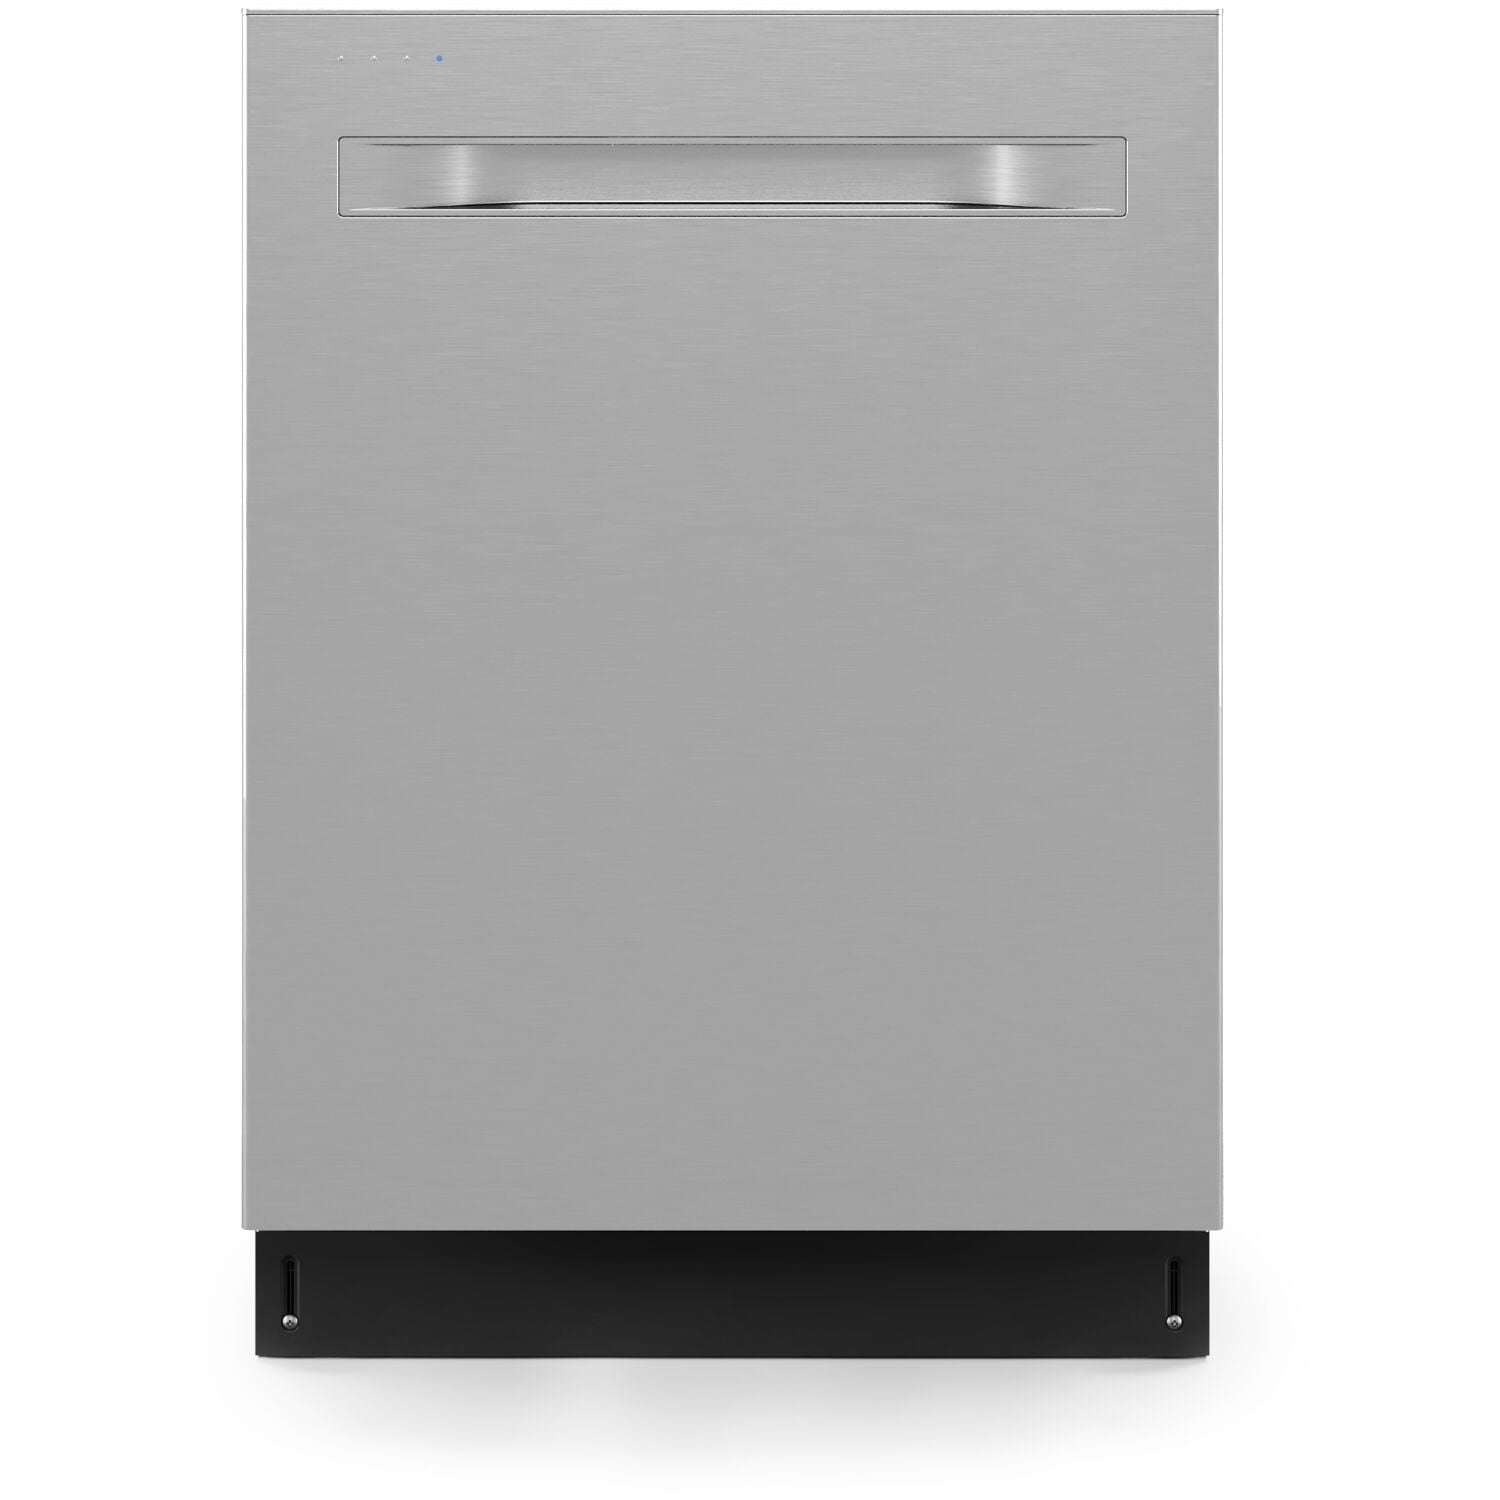 Midea 45 dBA UltraQuiet Dishwasher with WiFi and Targeted Wash Zones